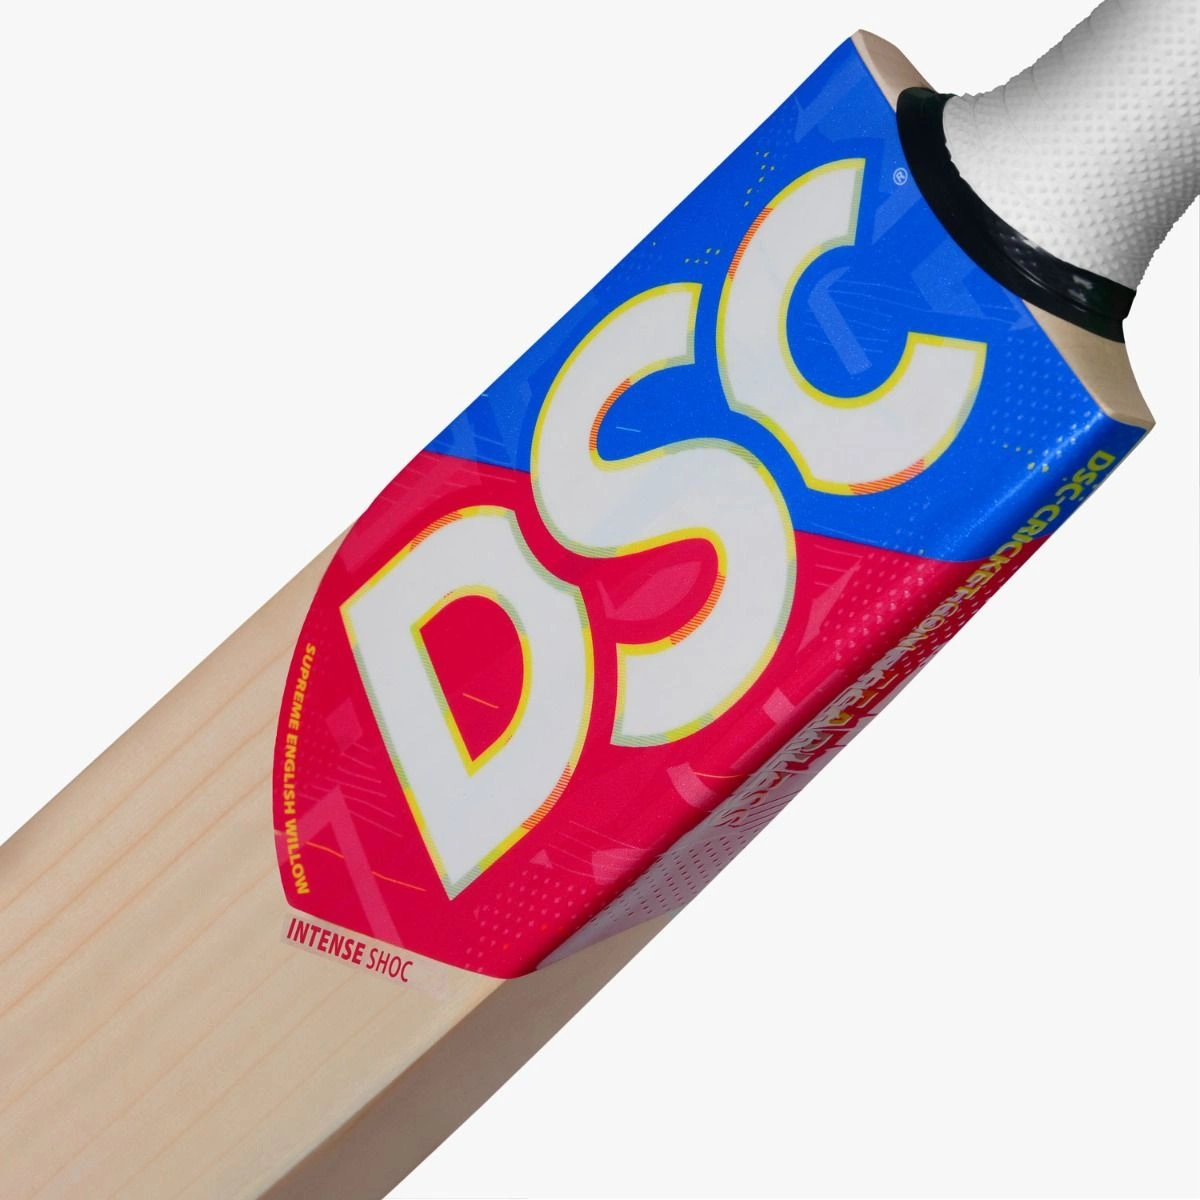 DSC Intense Shoc Grade 2 English Willow Cricket Bat: Ultra-Precise Cricket Bat with Thick Edges and Treble-Sprung Handle for Power-SH-1 Unit-3